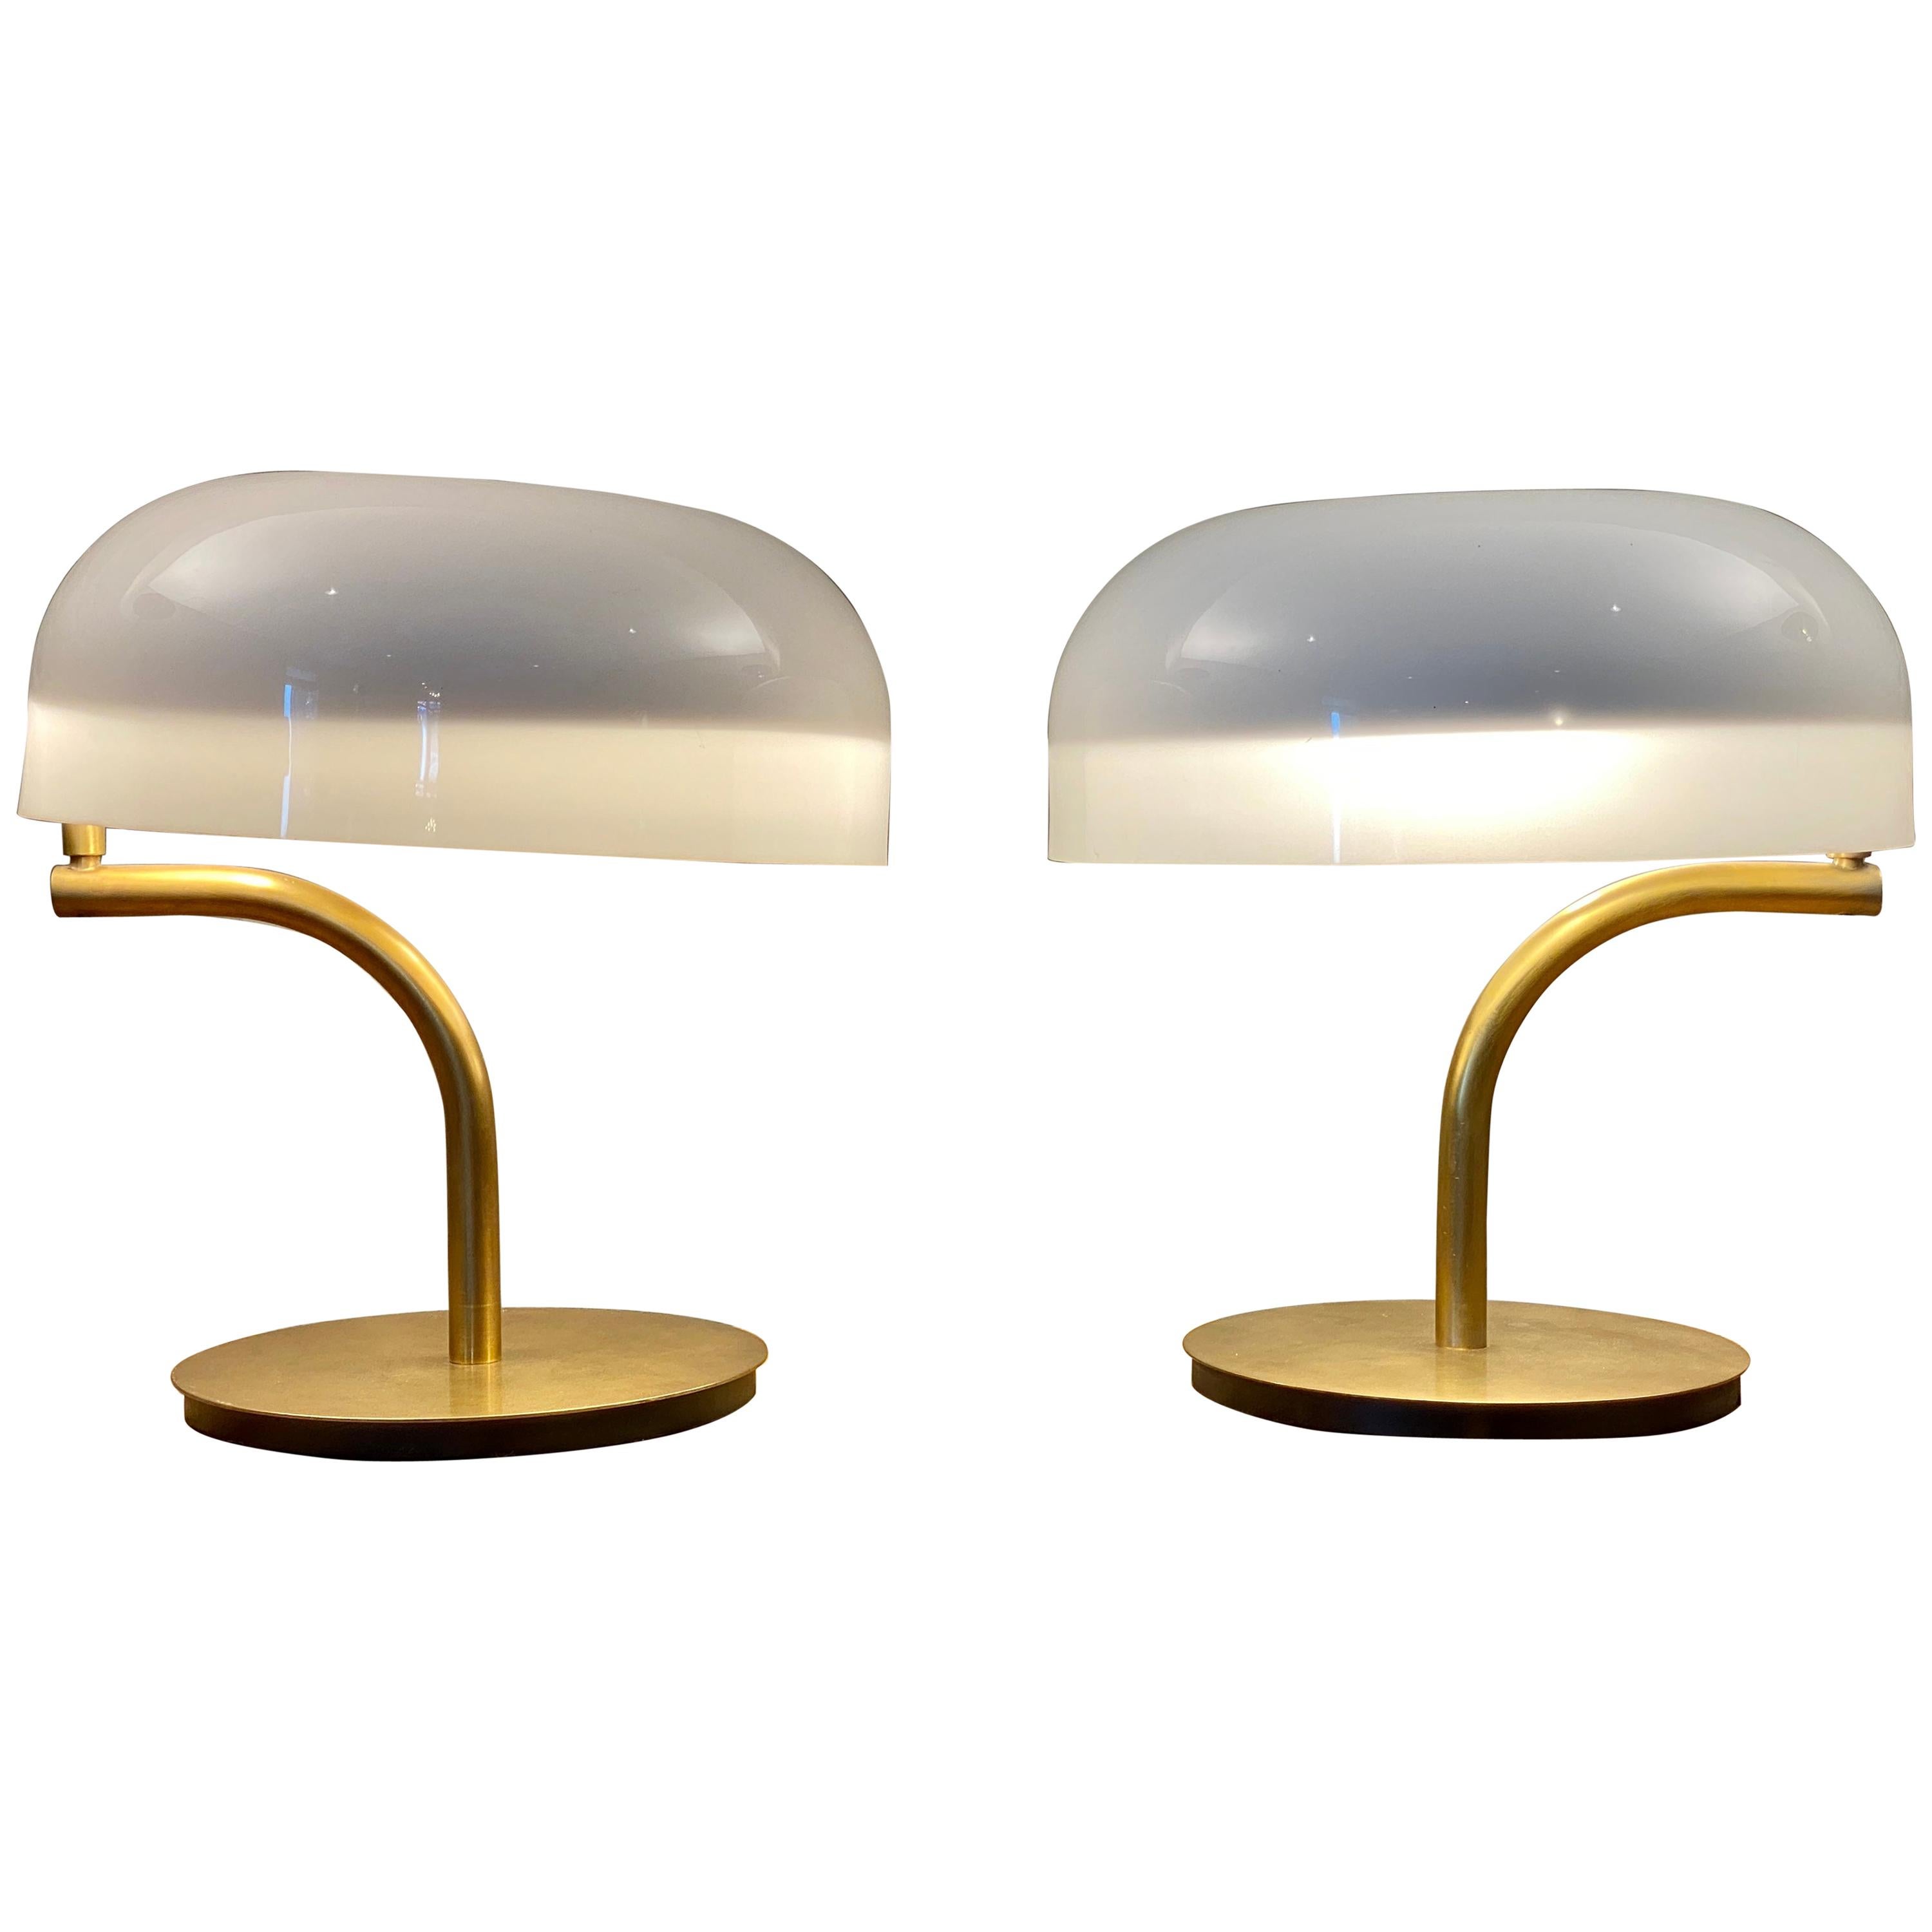 Pair of Giotto Stoppino Swing Arm Desk Lamps